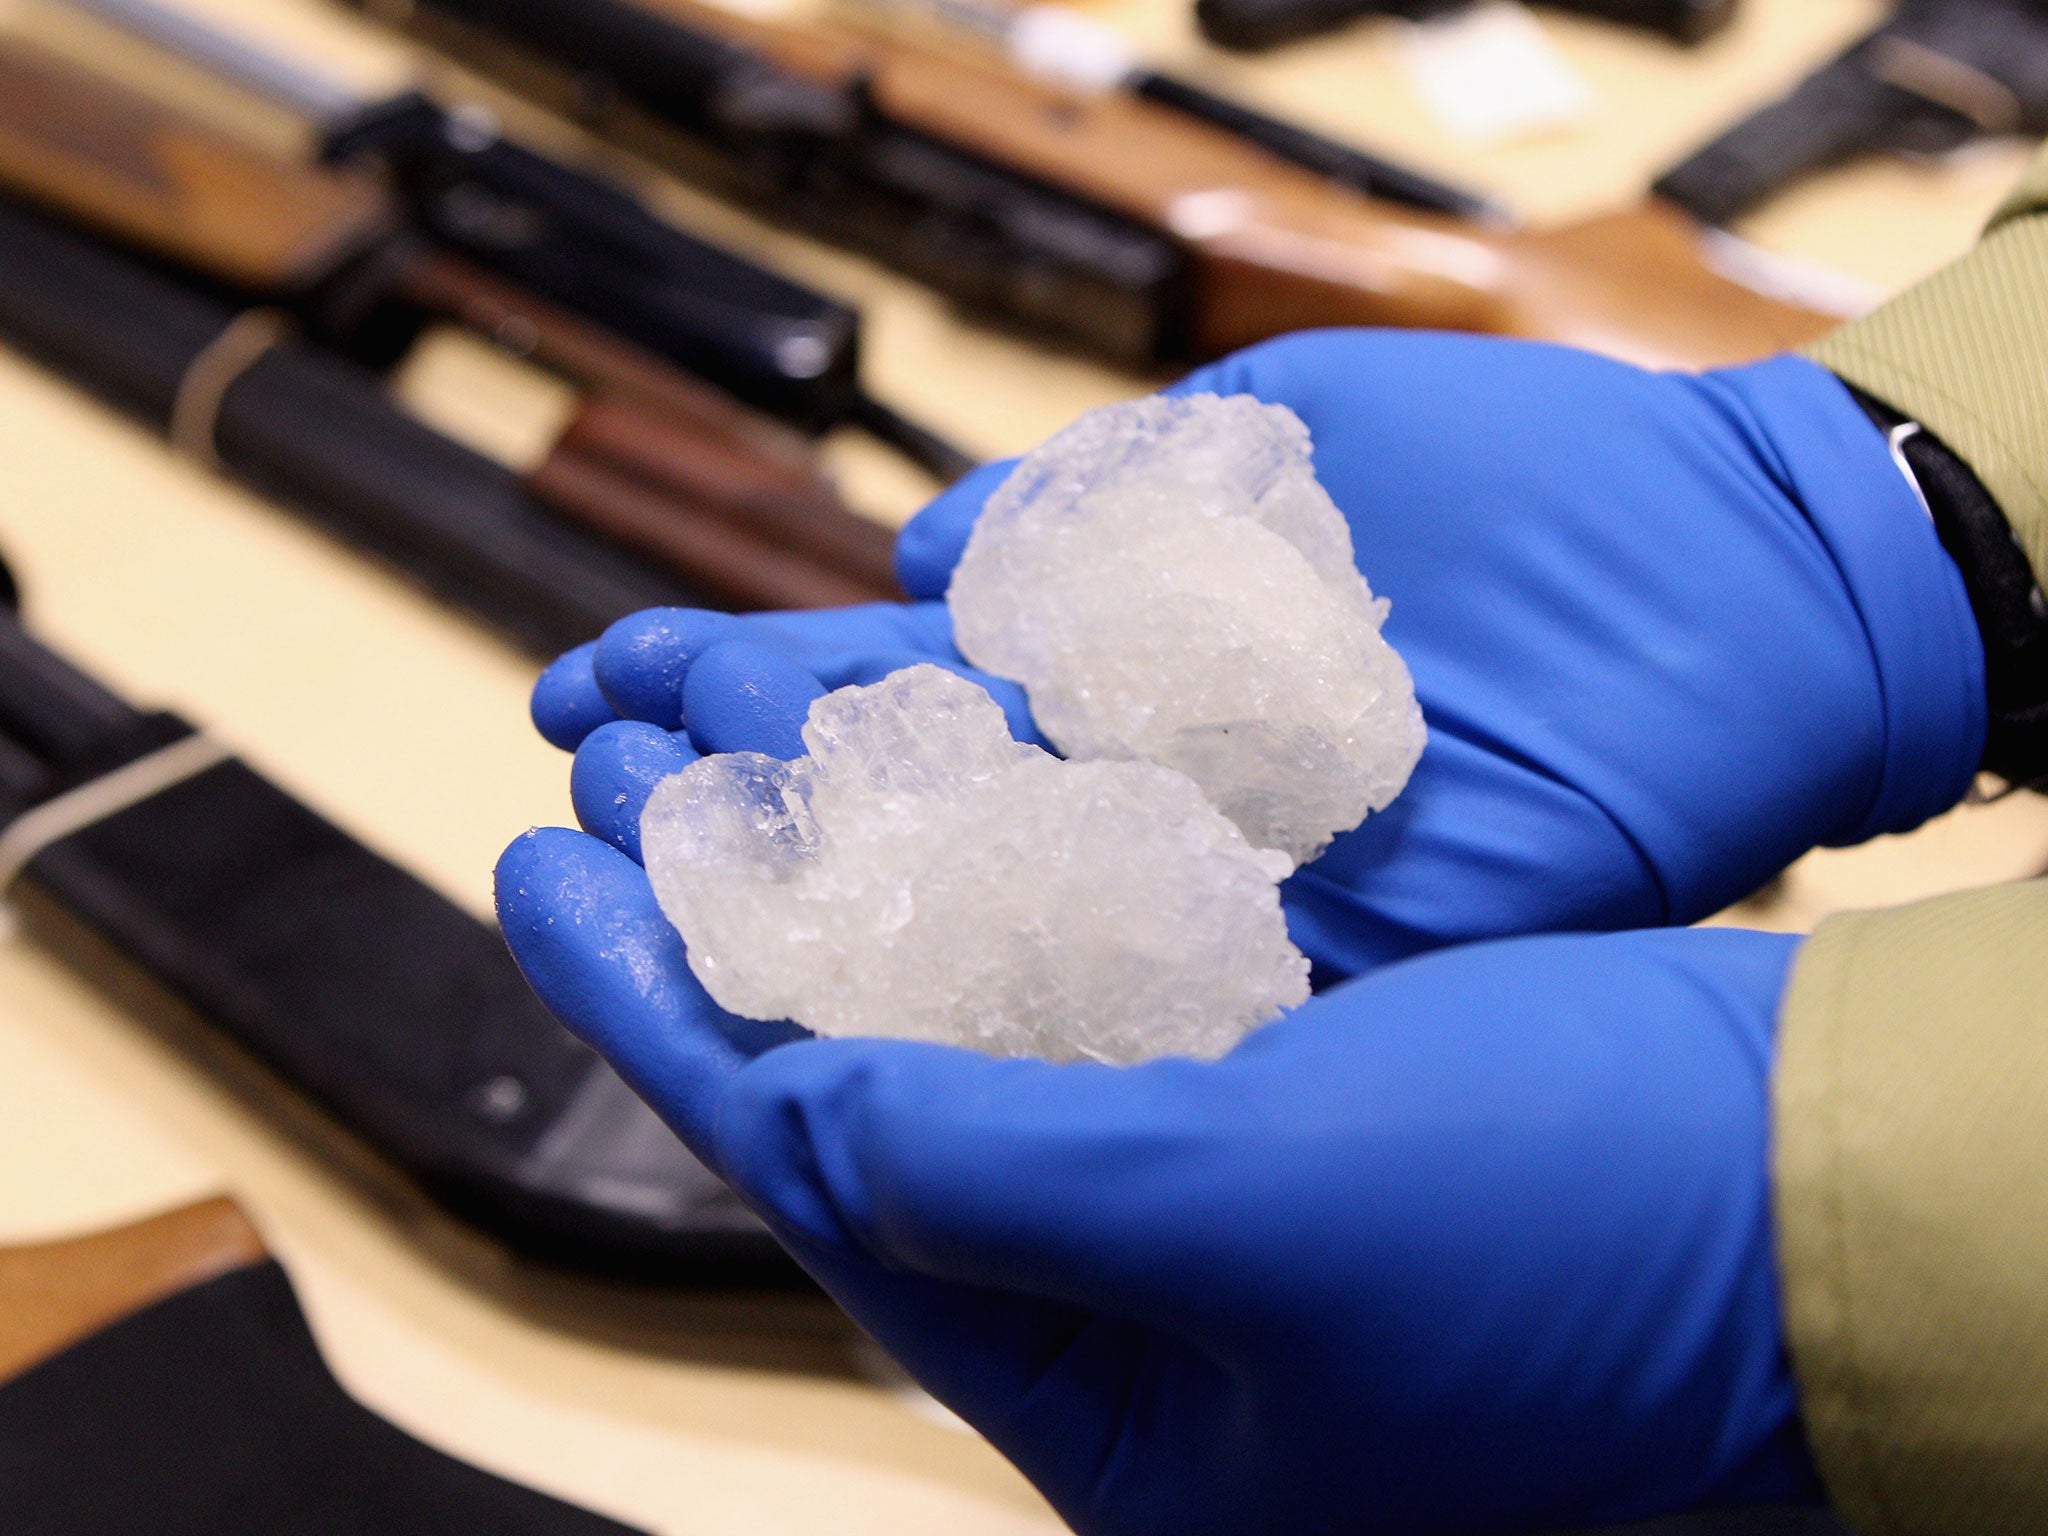 Two rocks of crystal meth seized by police 